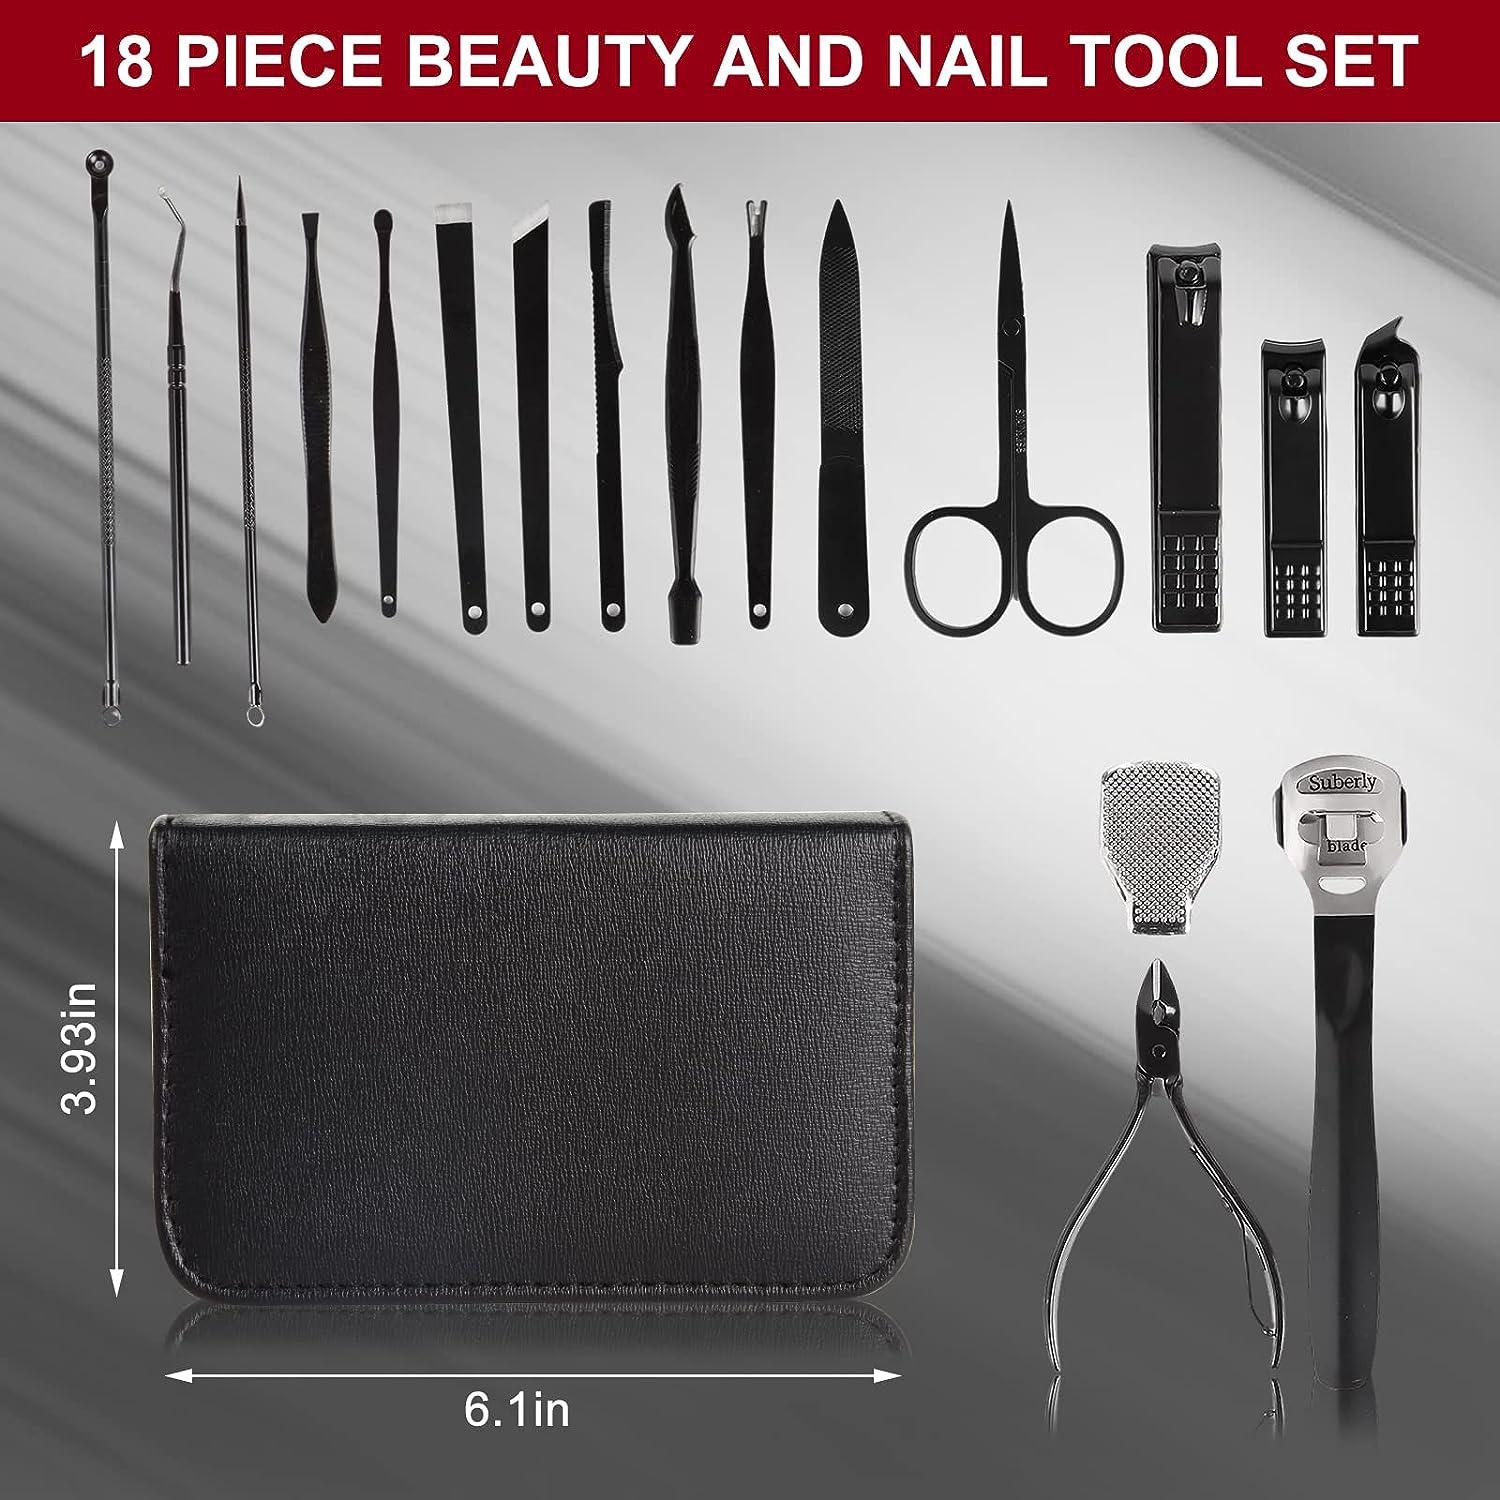 Manicure Pedicure Gift Set Nails Care Cuticle Pusher Pro Nail Cleaner  Germany | eBay